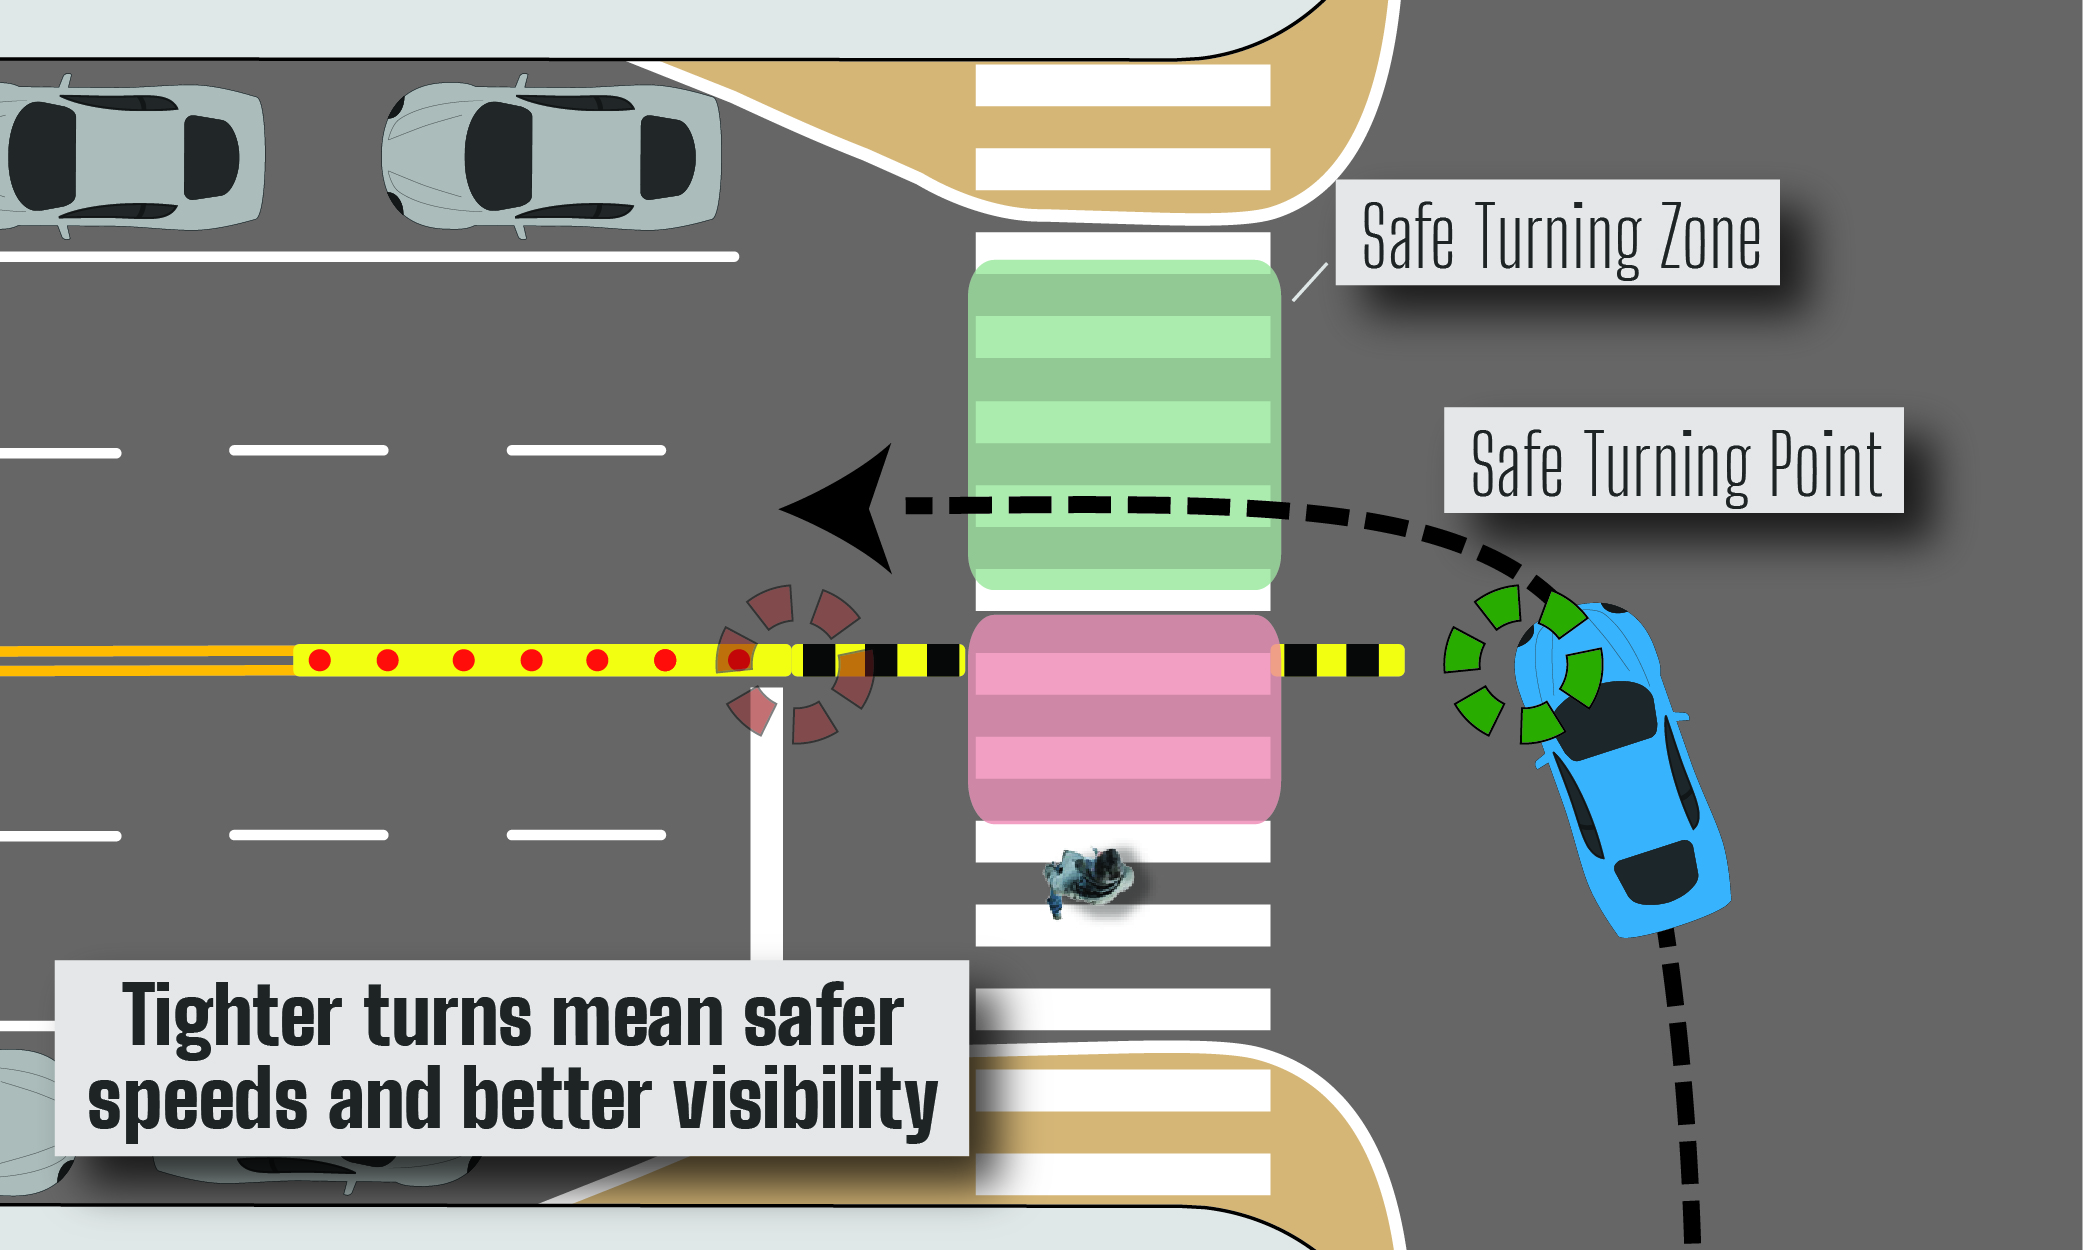 Diagram of intersection after installation of left turn traffic calming displaying the vehicle turning path cutting around the rubber speed bump. Tighter turns mean safer speeds and better visibility.